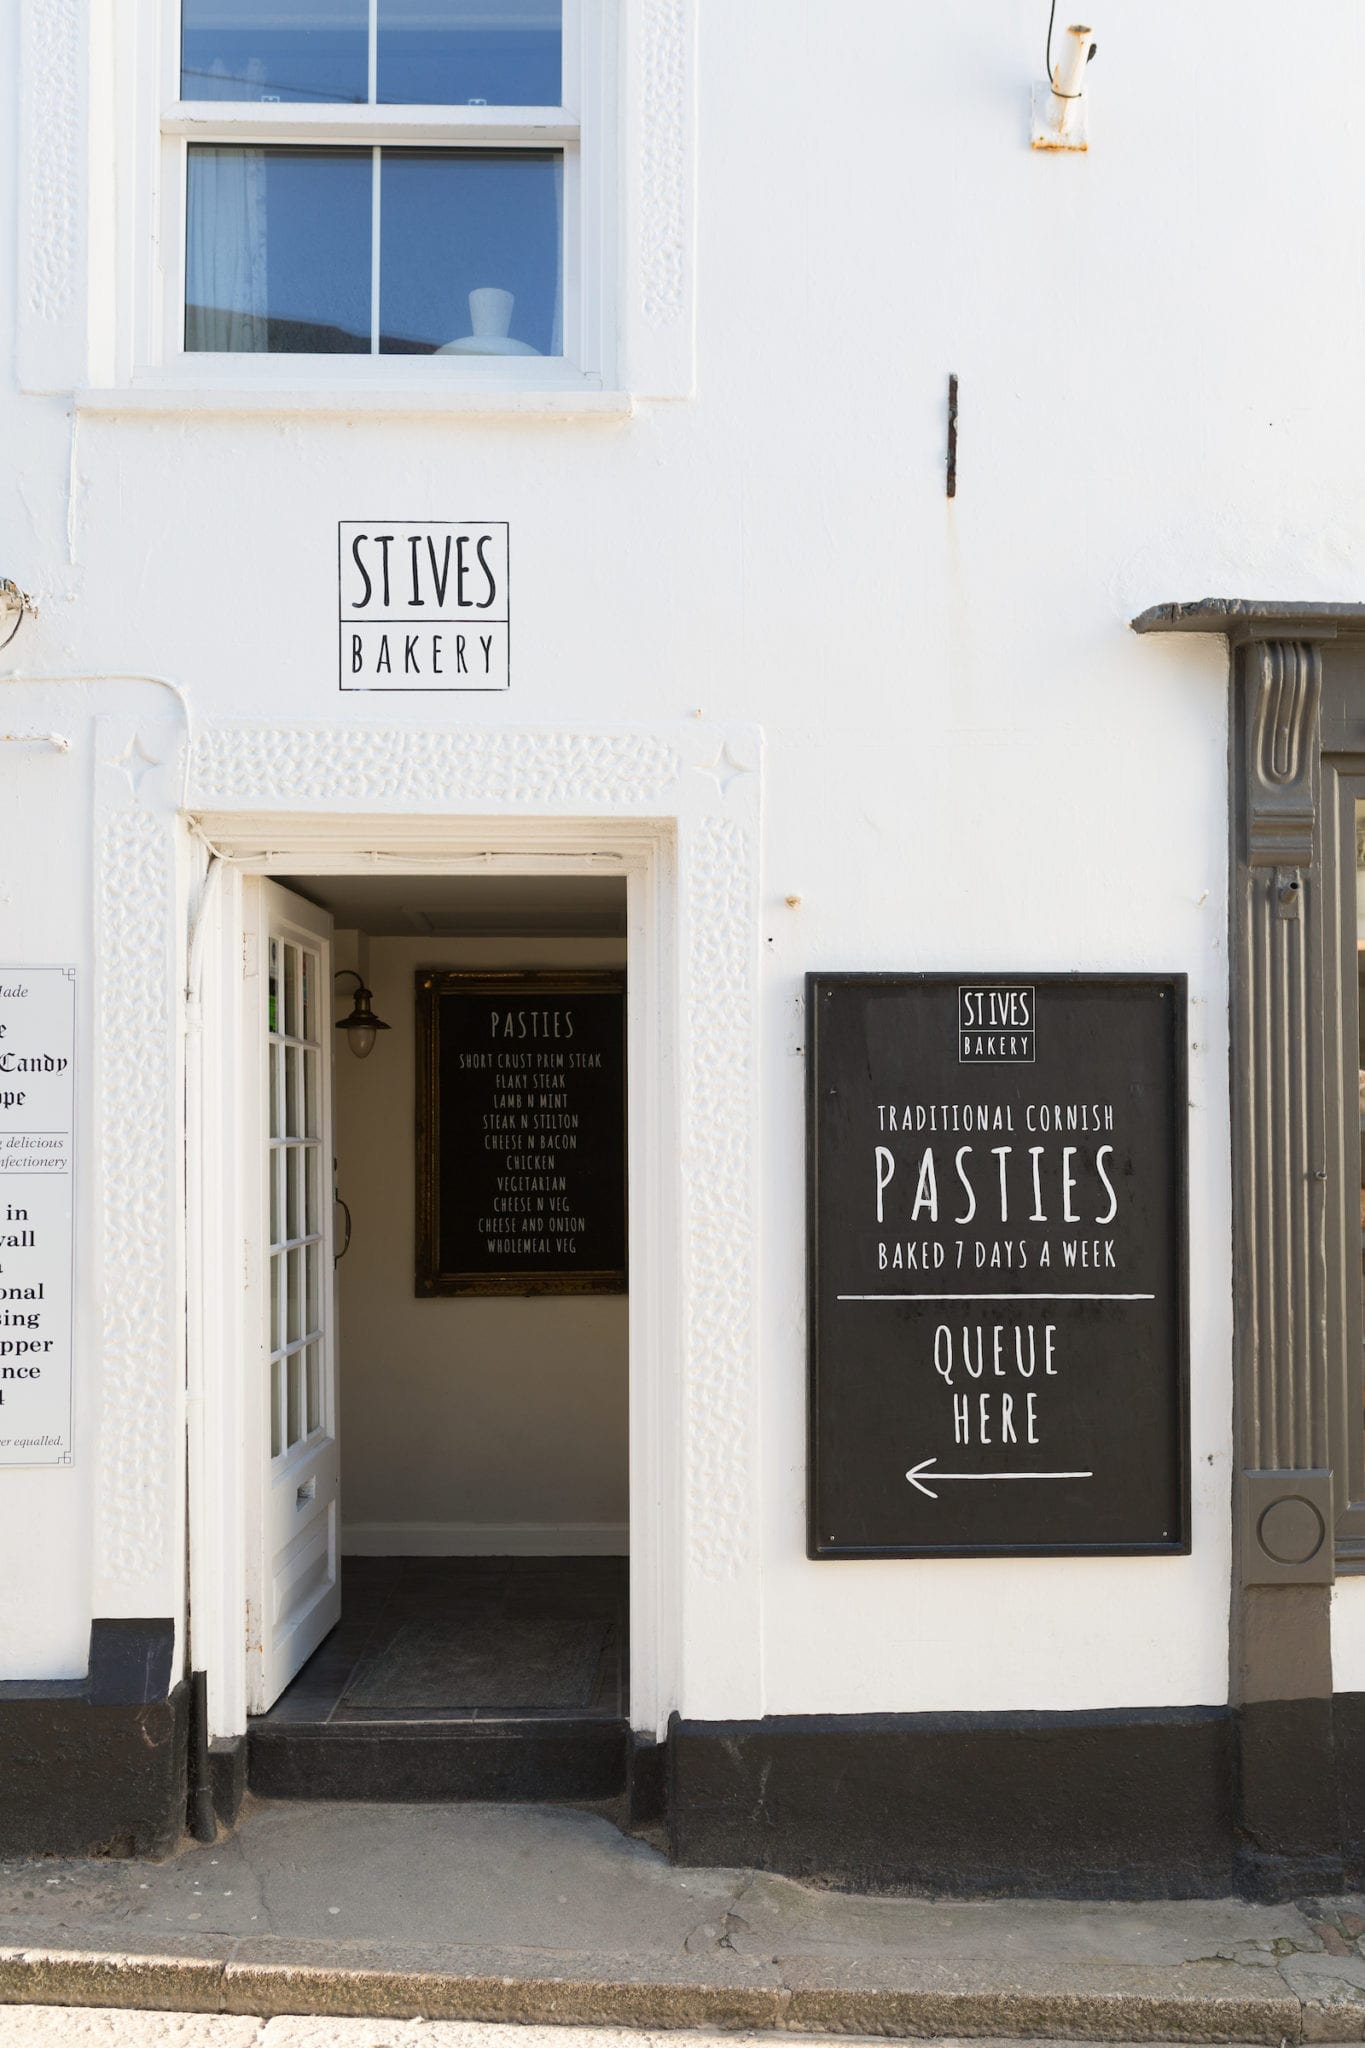 The exterior of St Ives Bakery